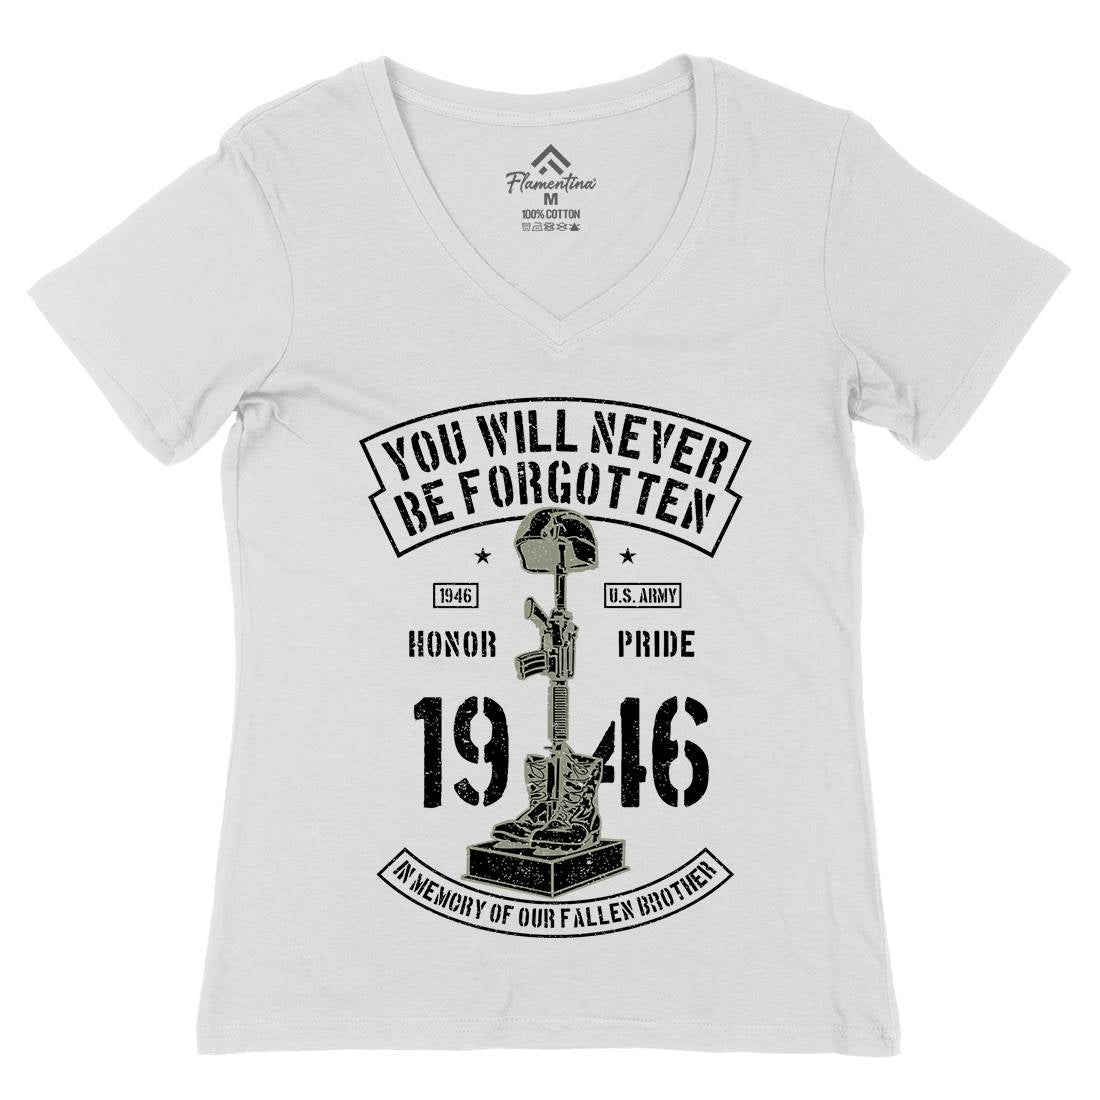 You Will Never Be Forgotten Womens Organic V-Neck T-Shirt Army A800